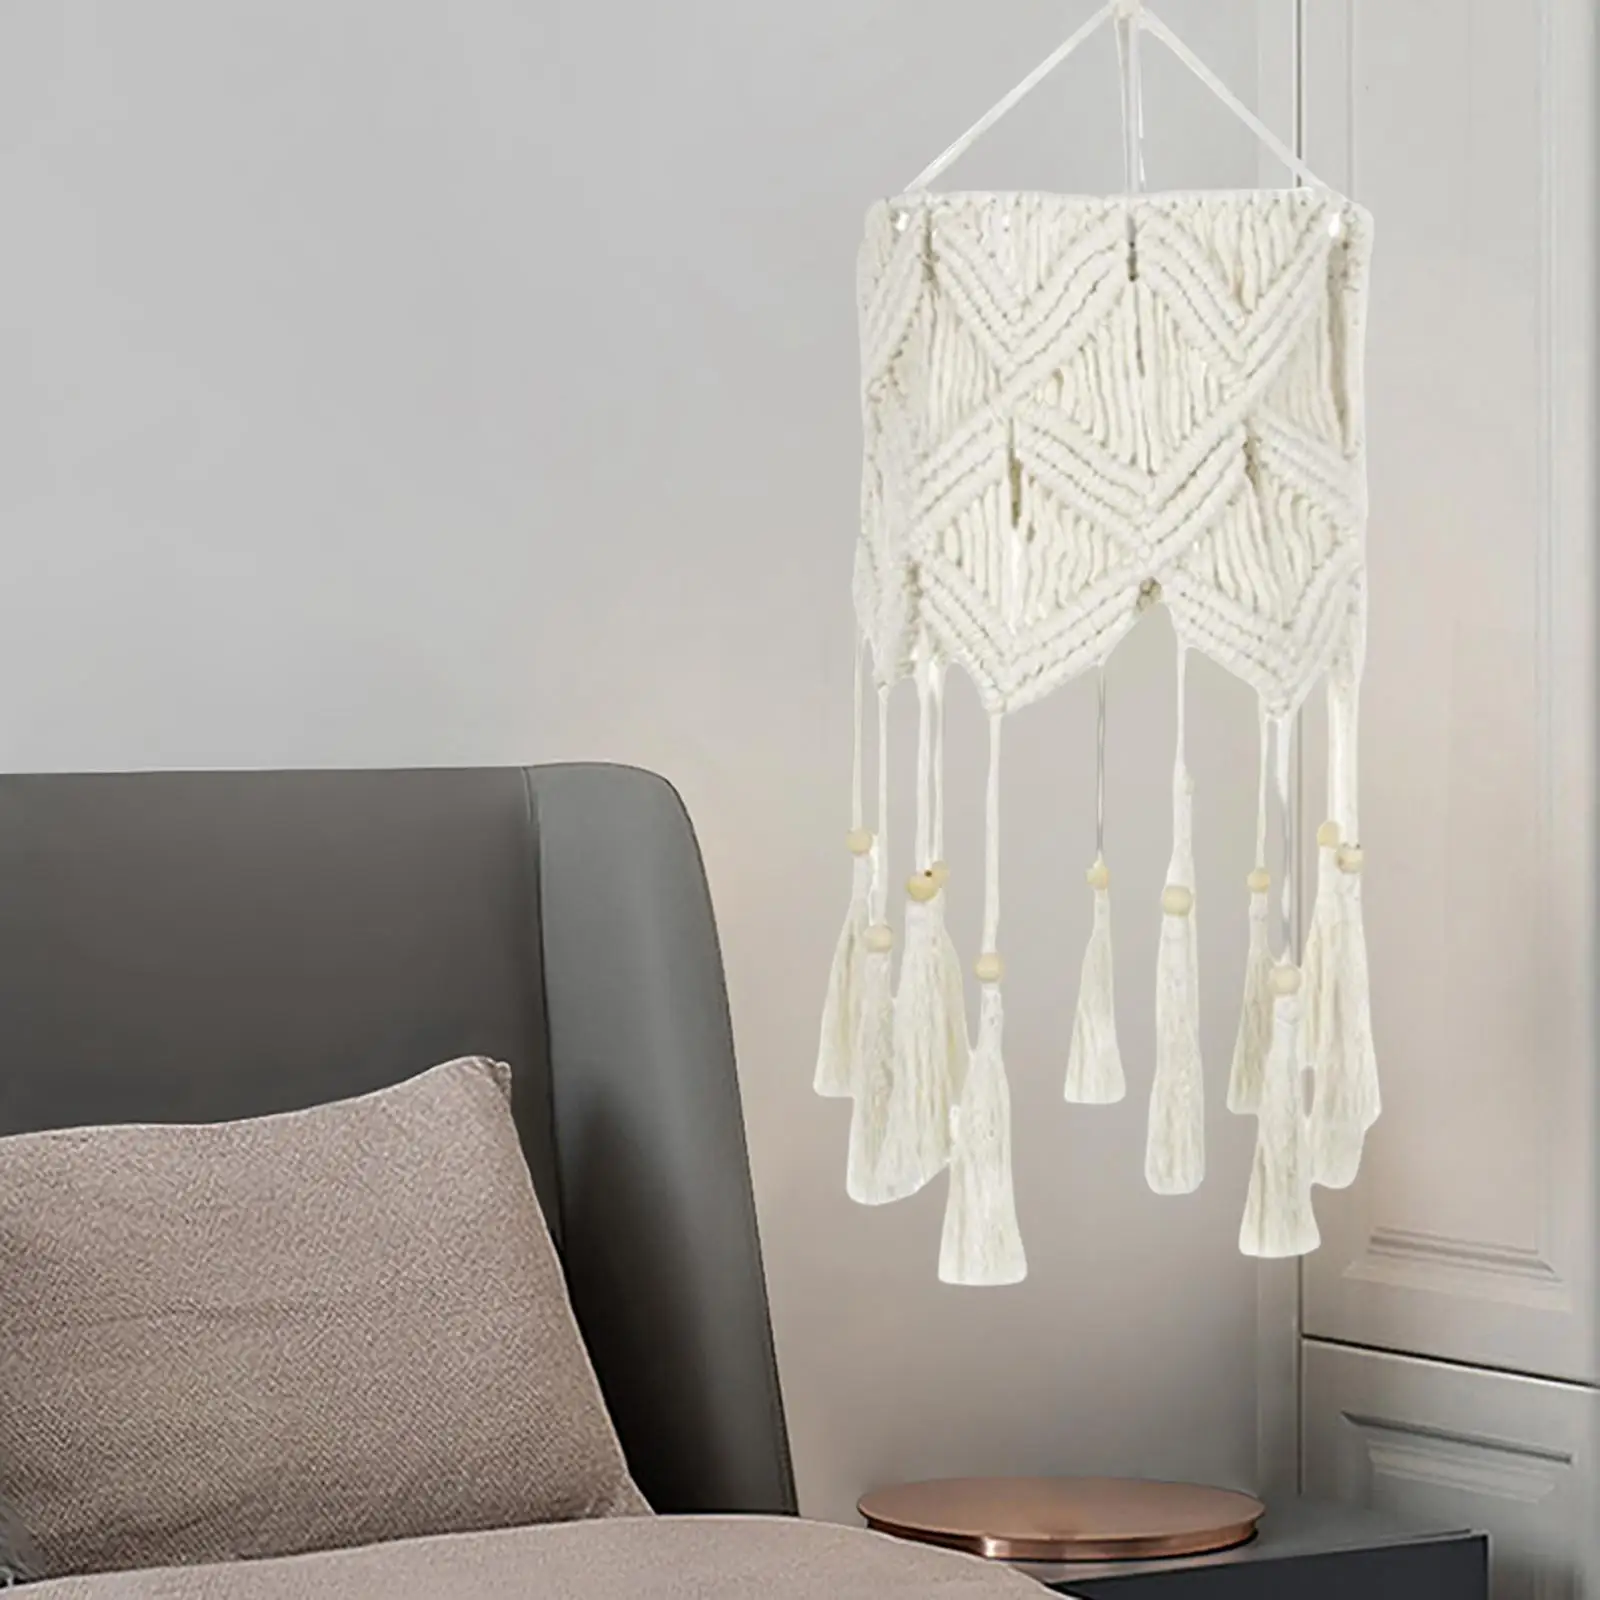 Macrame Lampshade Ceiling Light Shade Fitting Boho Hanging Pendant Light Cover for Dorm Room Home Living Room Office Ornaments